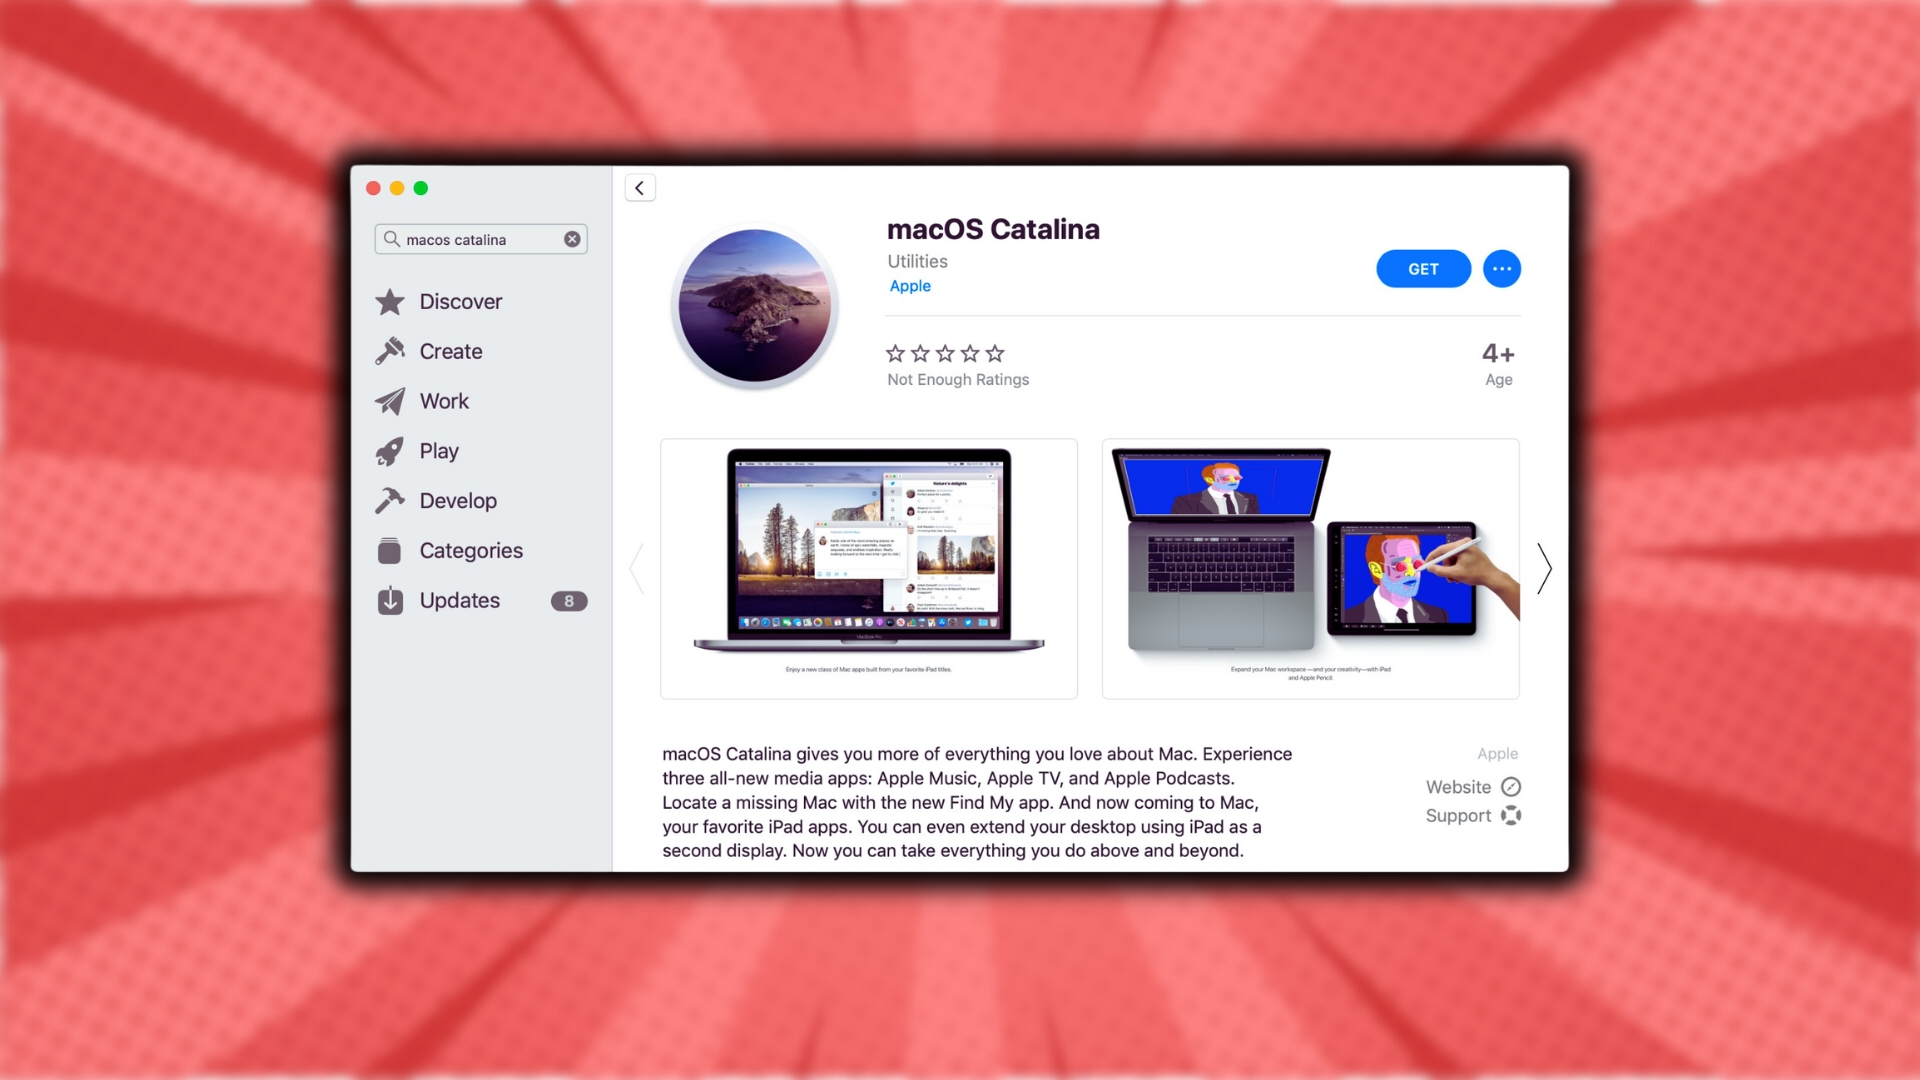 Get the Catalina DMG from the Mac App Store